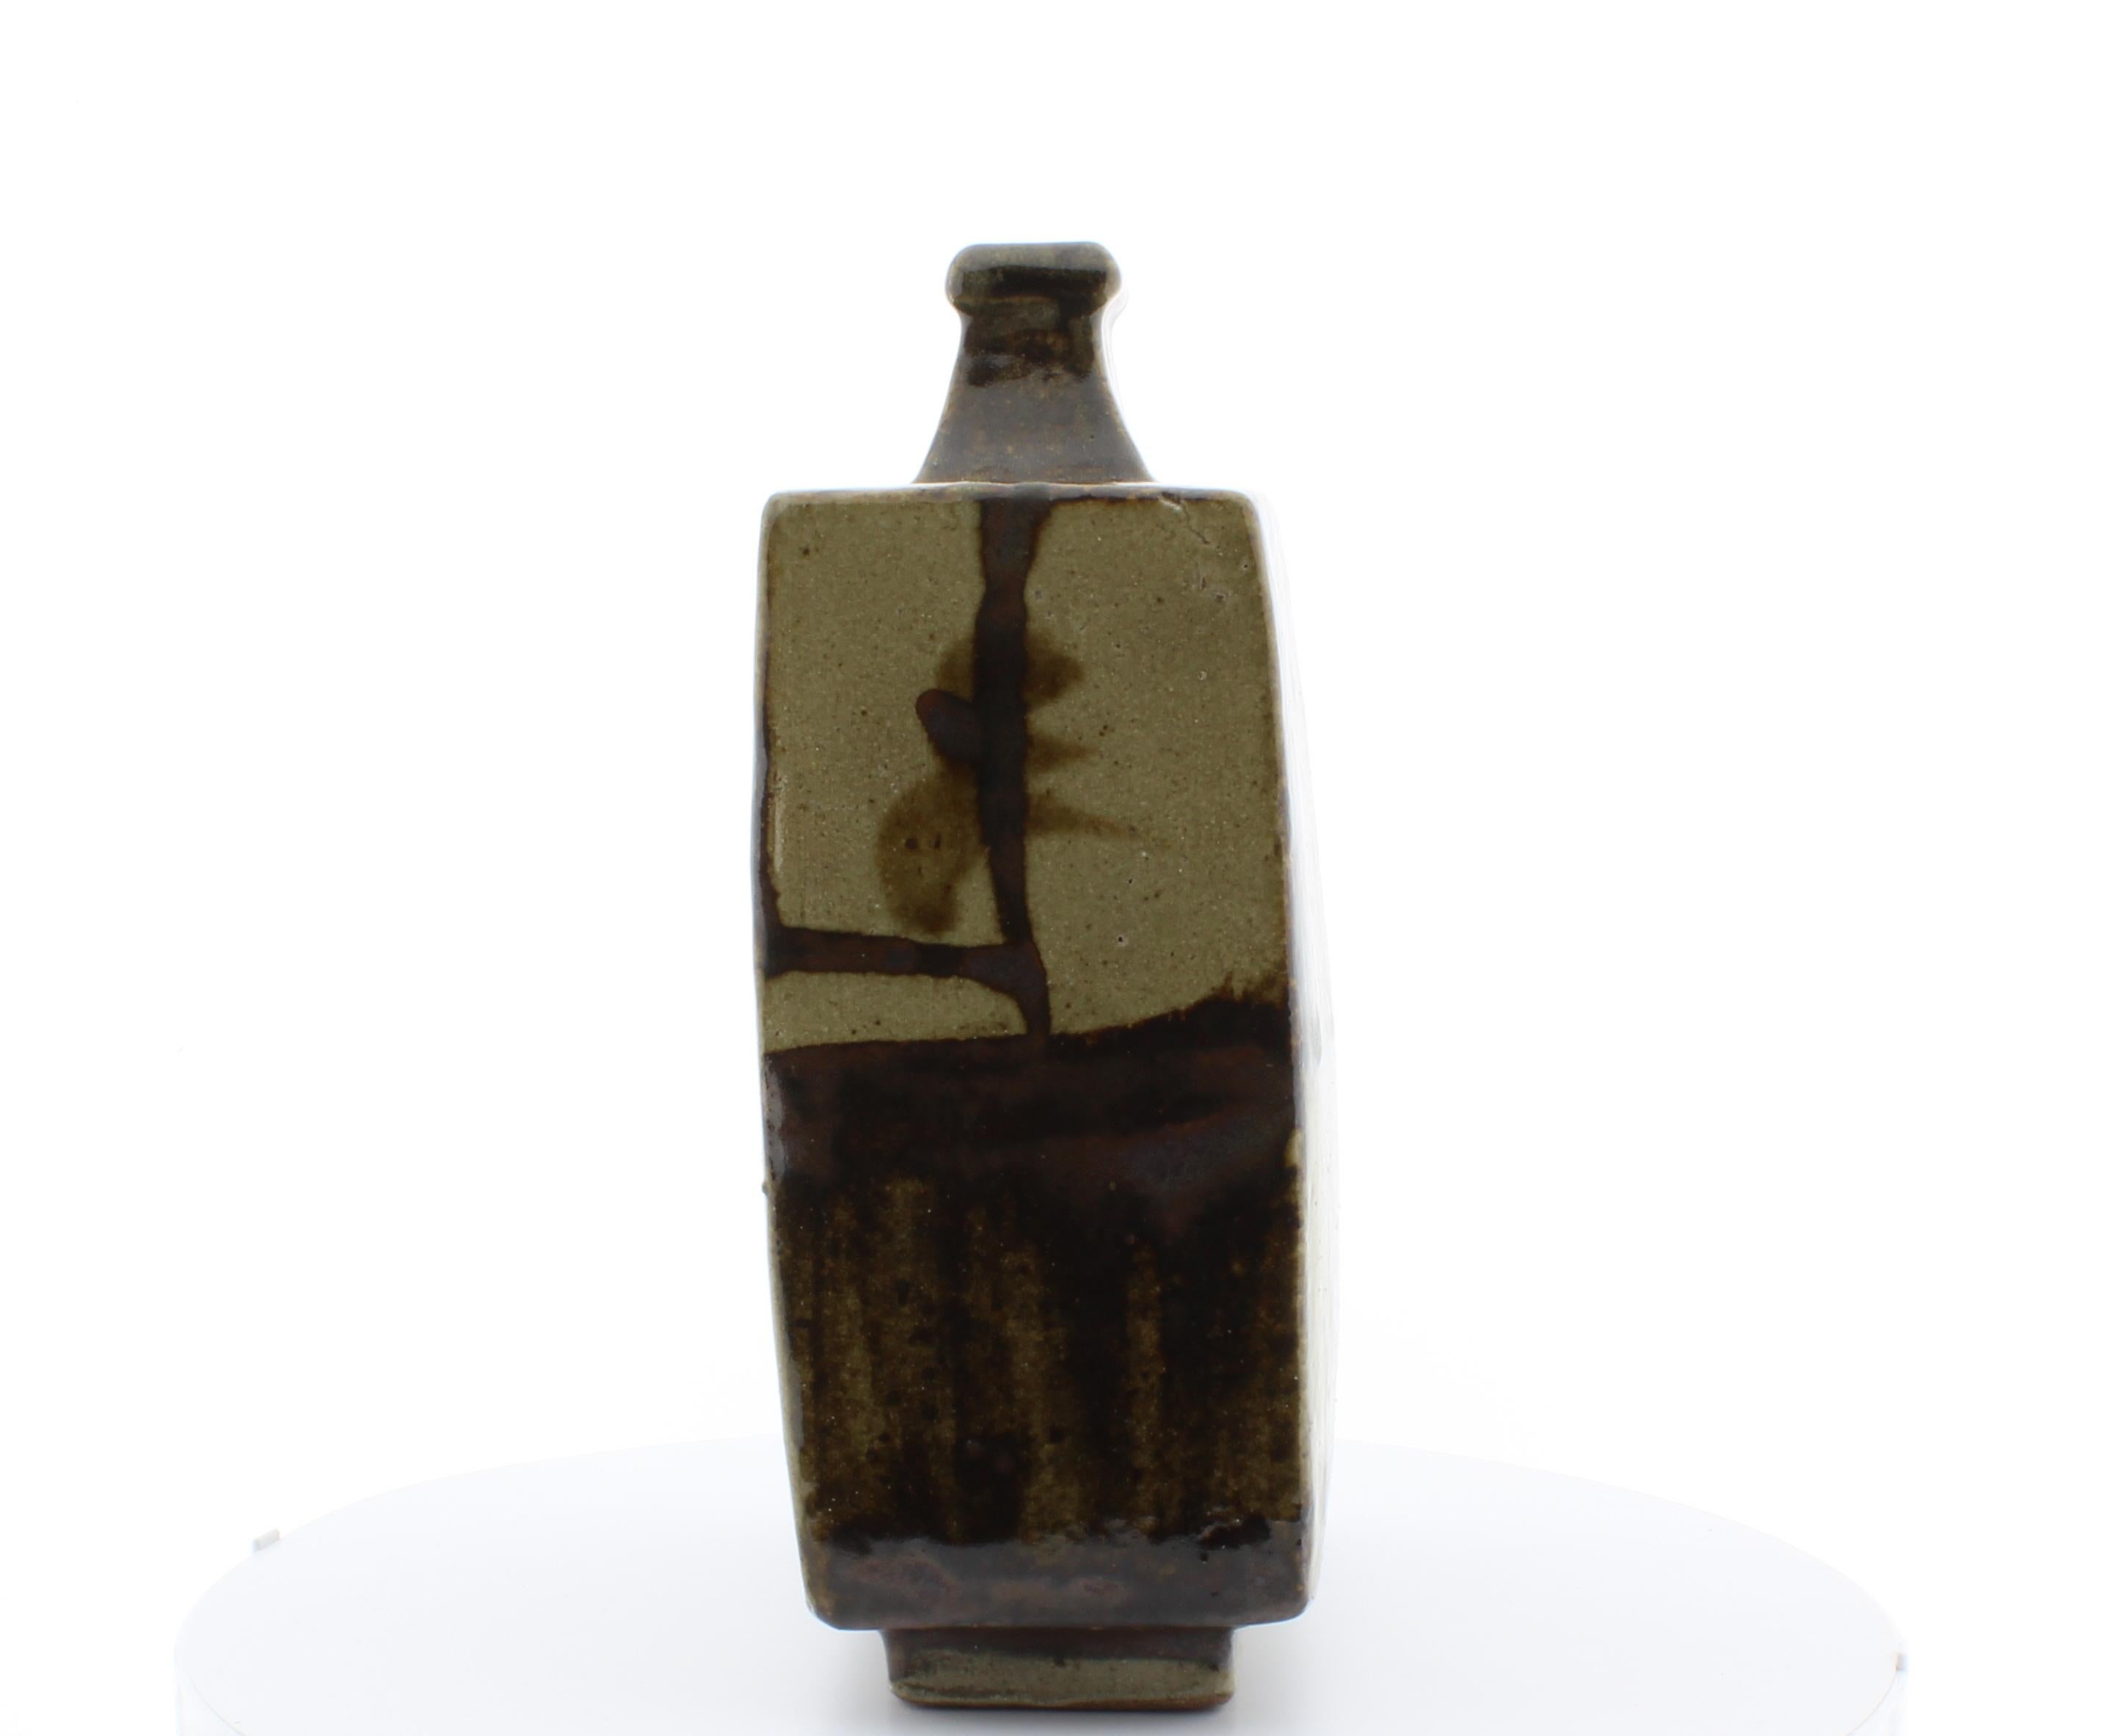 Artist: Shoji Hanada (1894-1978)
Title: Square Bottle Vase
Date: 20th century
Dimensions: (W) 14.8 (H) 23.3 (D) 7 cm
Condition: Cracks formed naturally from firing process.

A square shaped bottle vase with ash glaze and tetsu-e iron-oxide brushwork